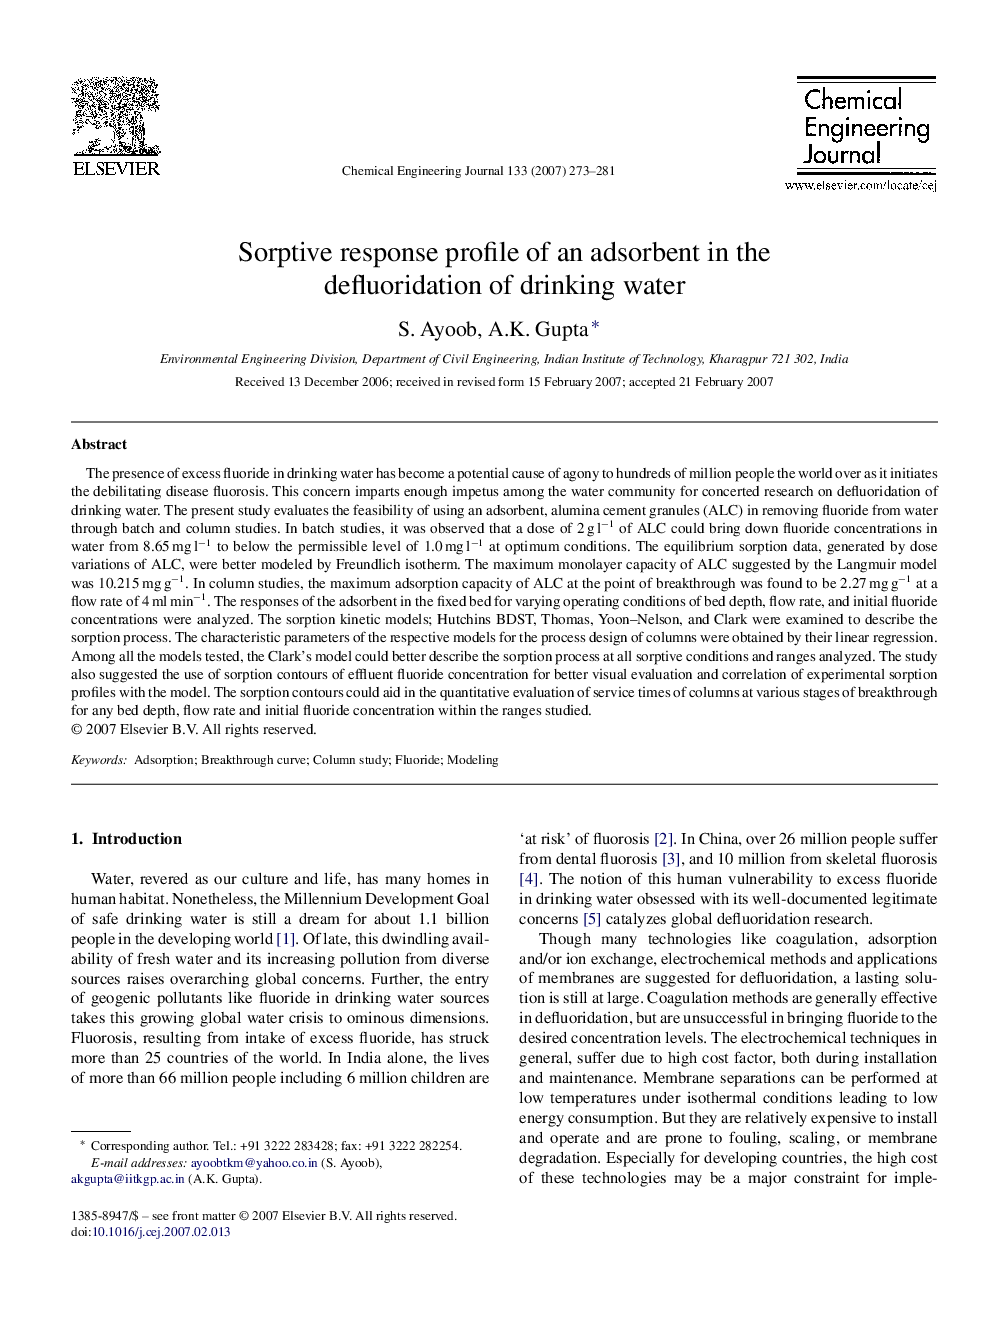 Sorptive response profile of an adsorbent in the defluoridation of drinking water